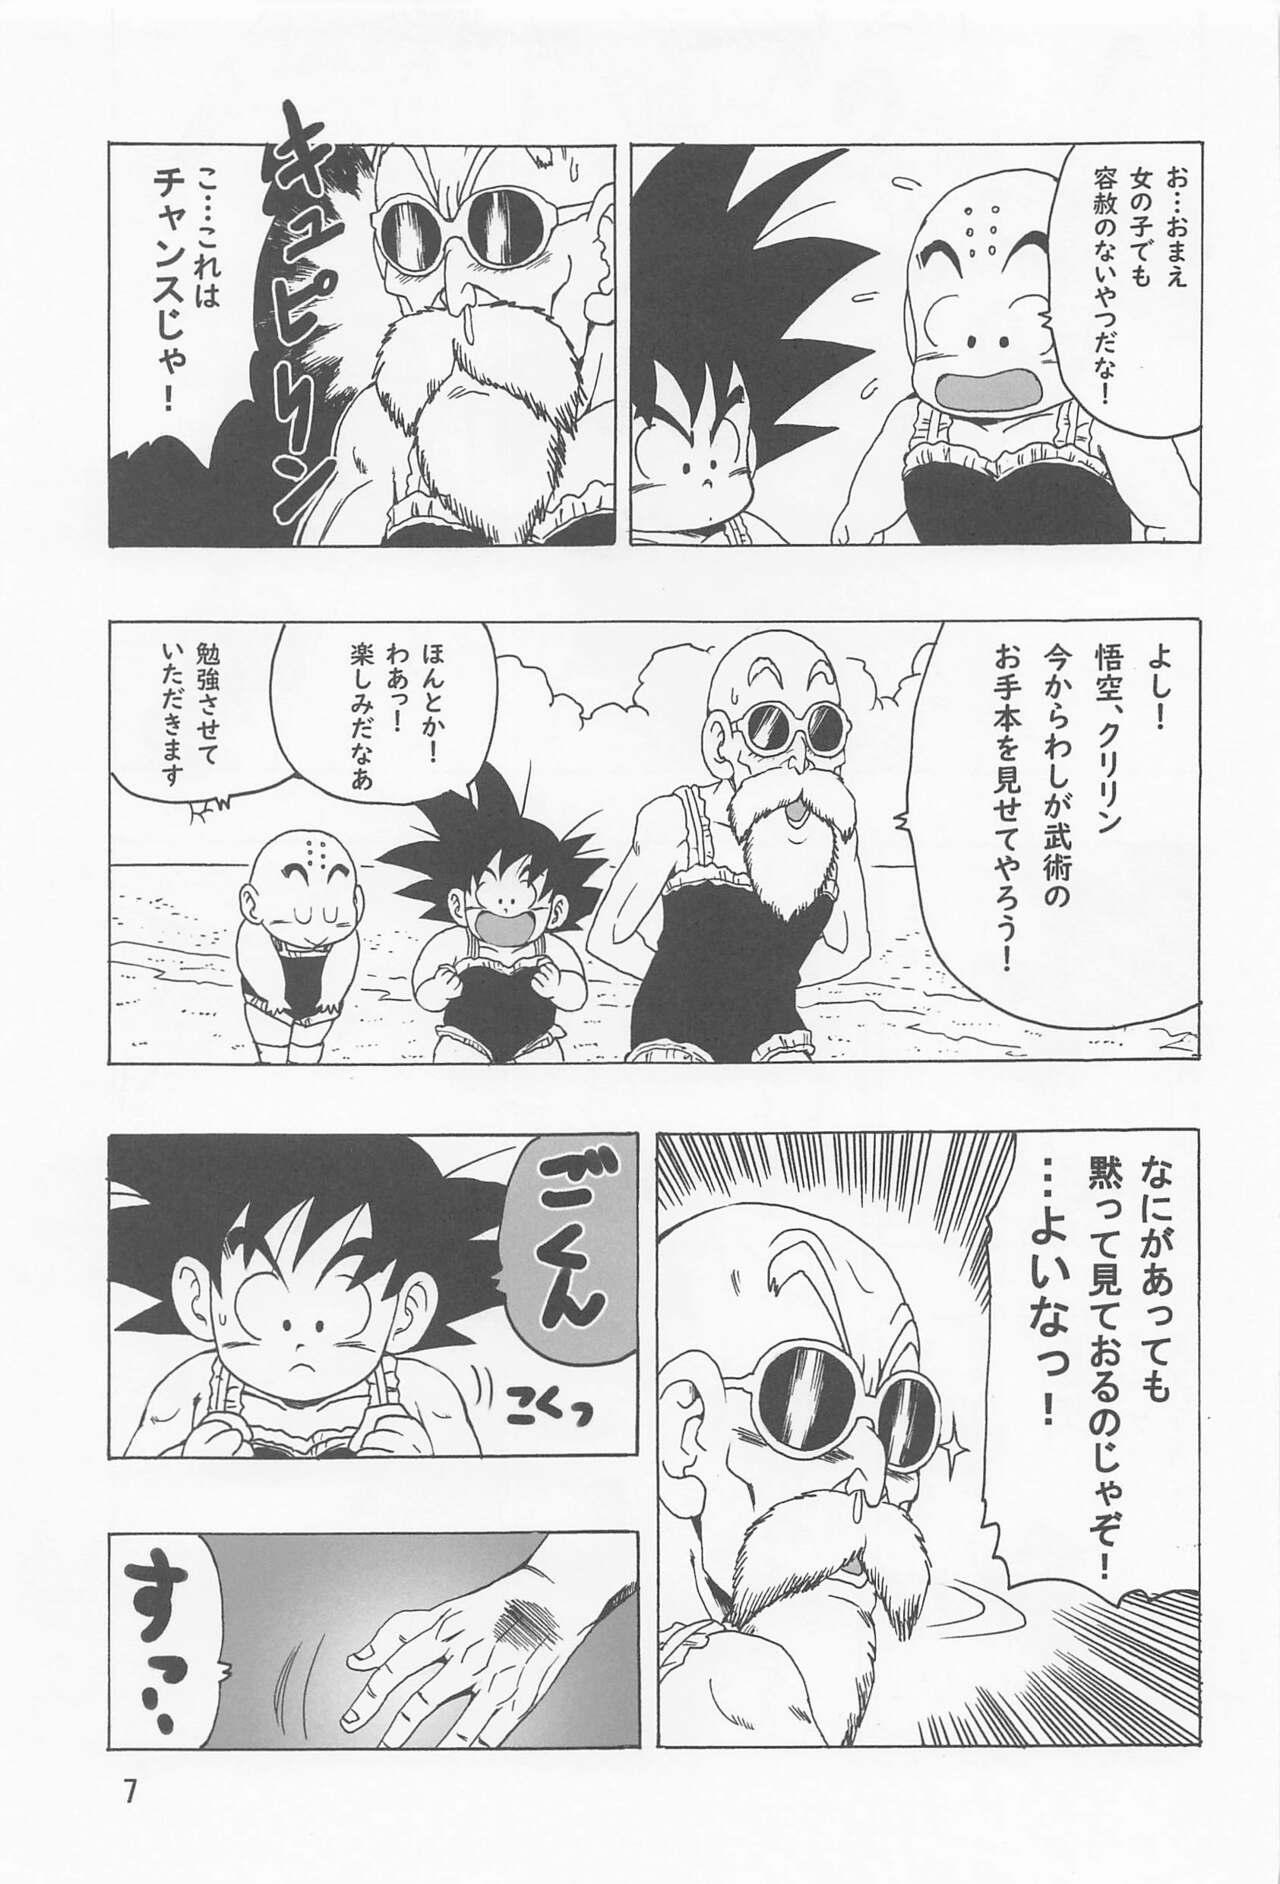 Brazzers Episode of Lunch 1 - Dragon ball Cam Girl - Page 8